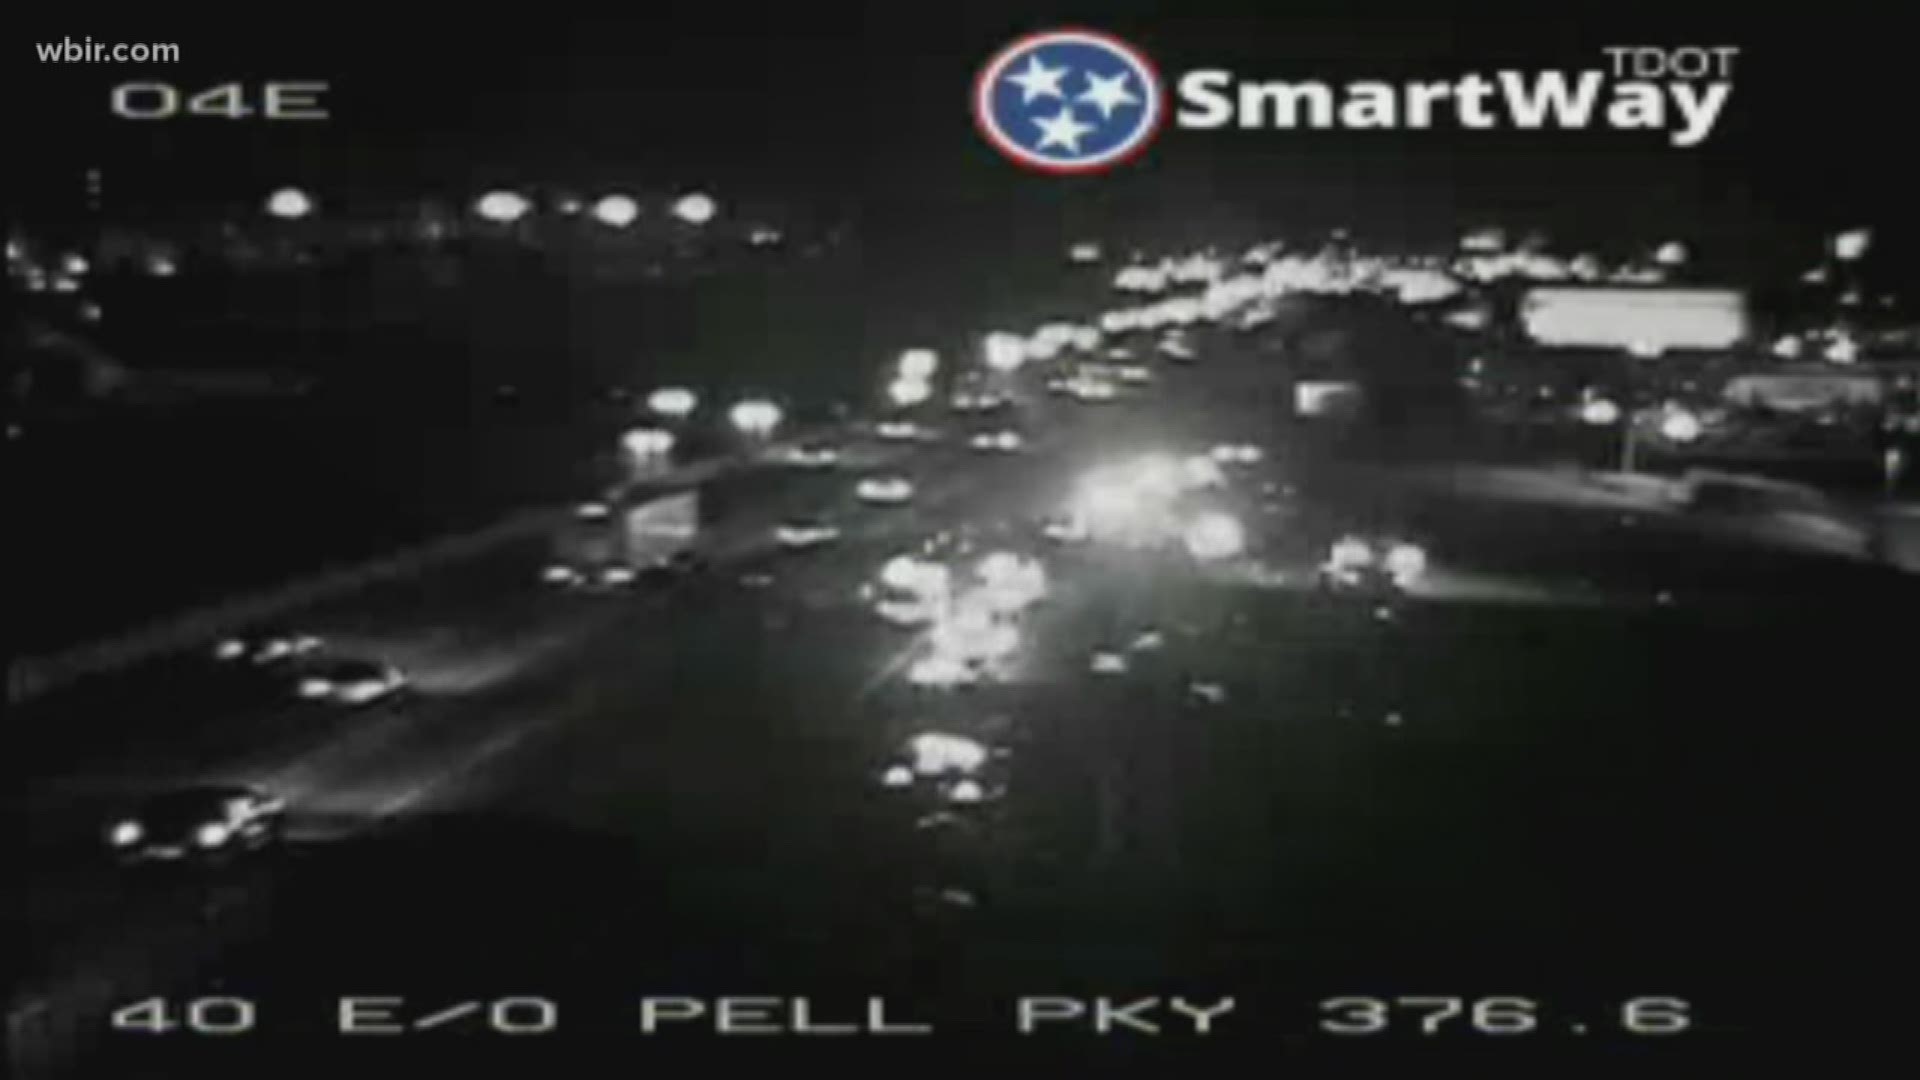 A woman is in the hospital with life-threatening injuries after being hit by a vehicle on I-40.